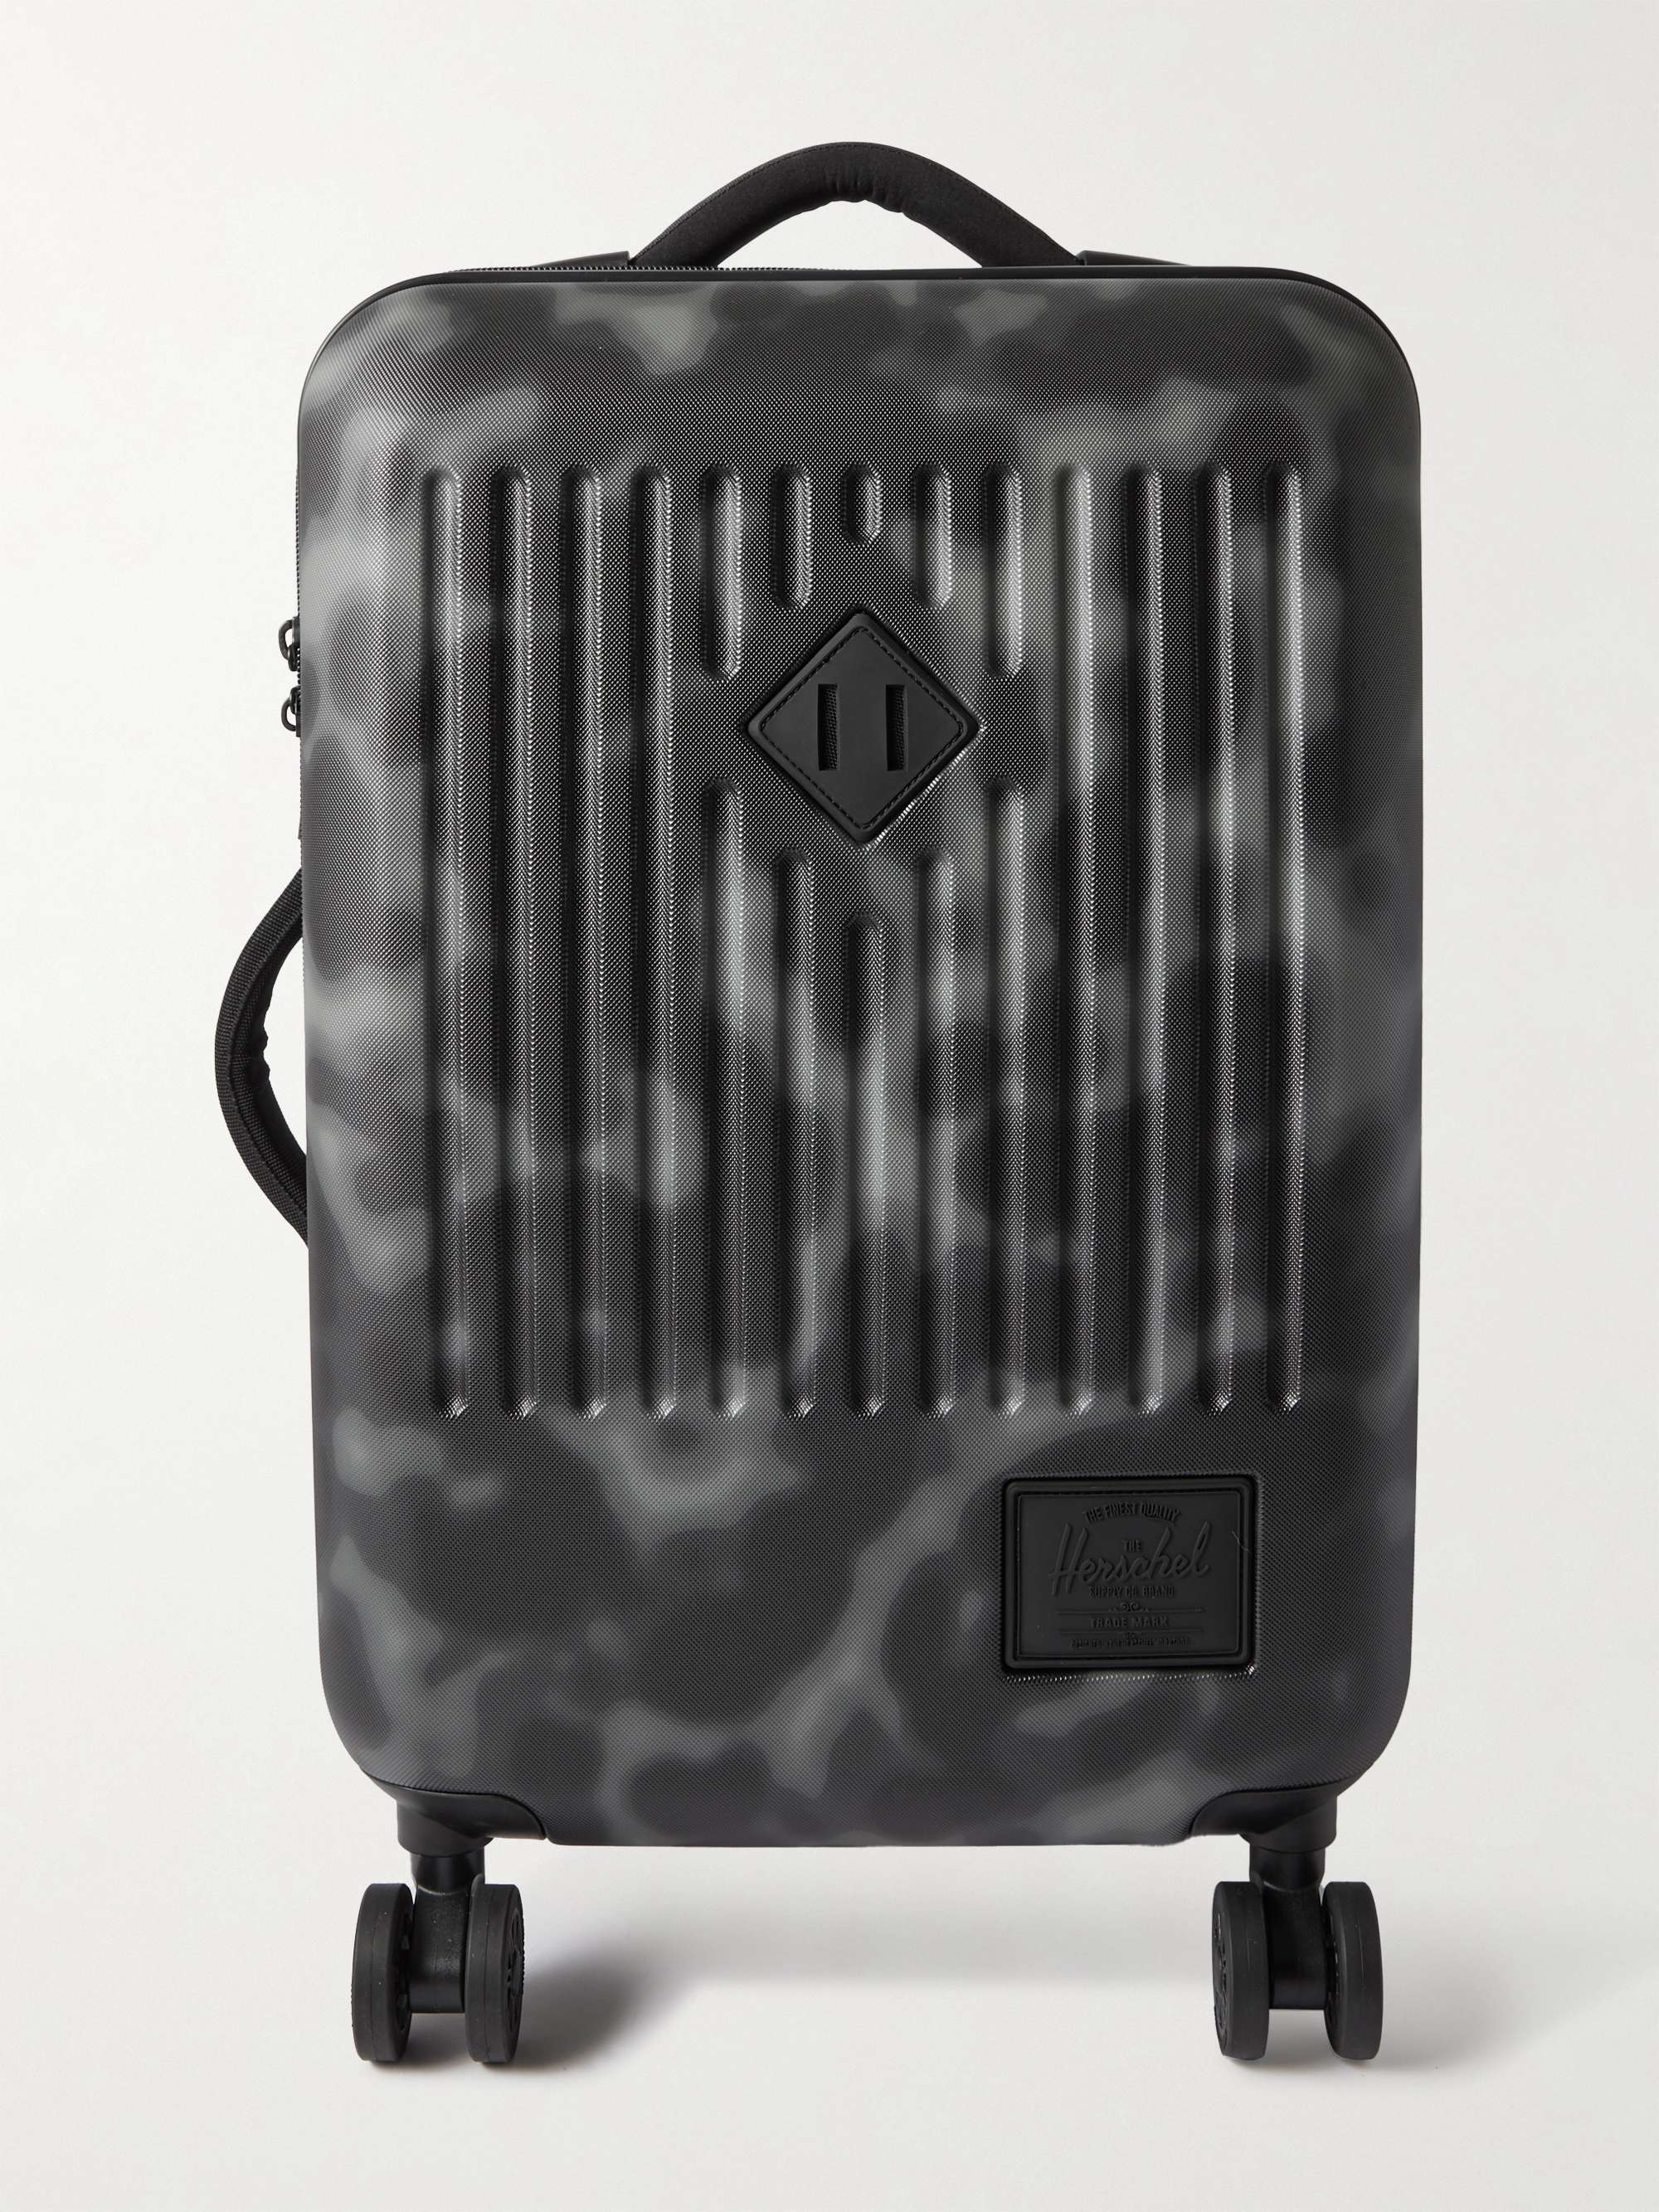 HERSCHEL SUPPLY CO. Trade Large Carry-On Suitcase